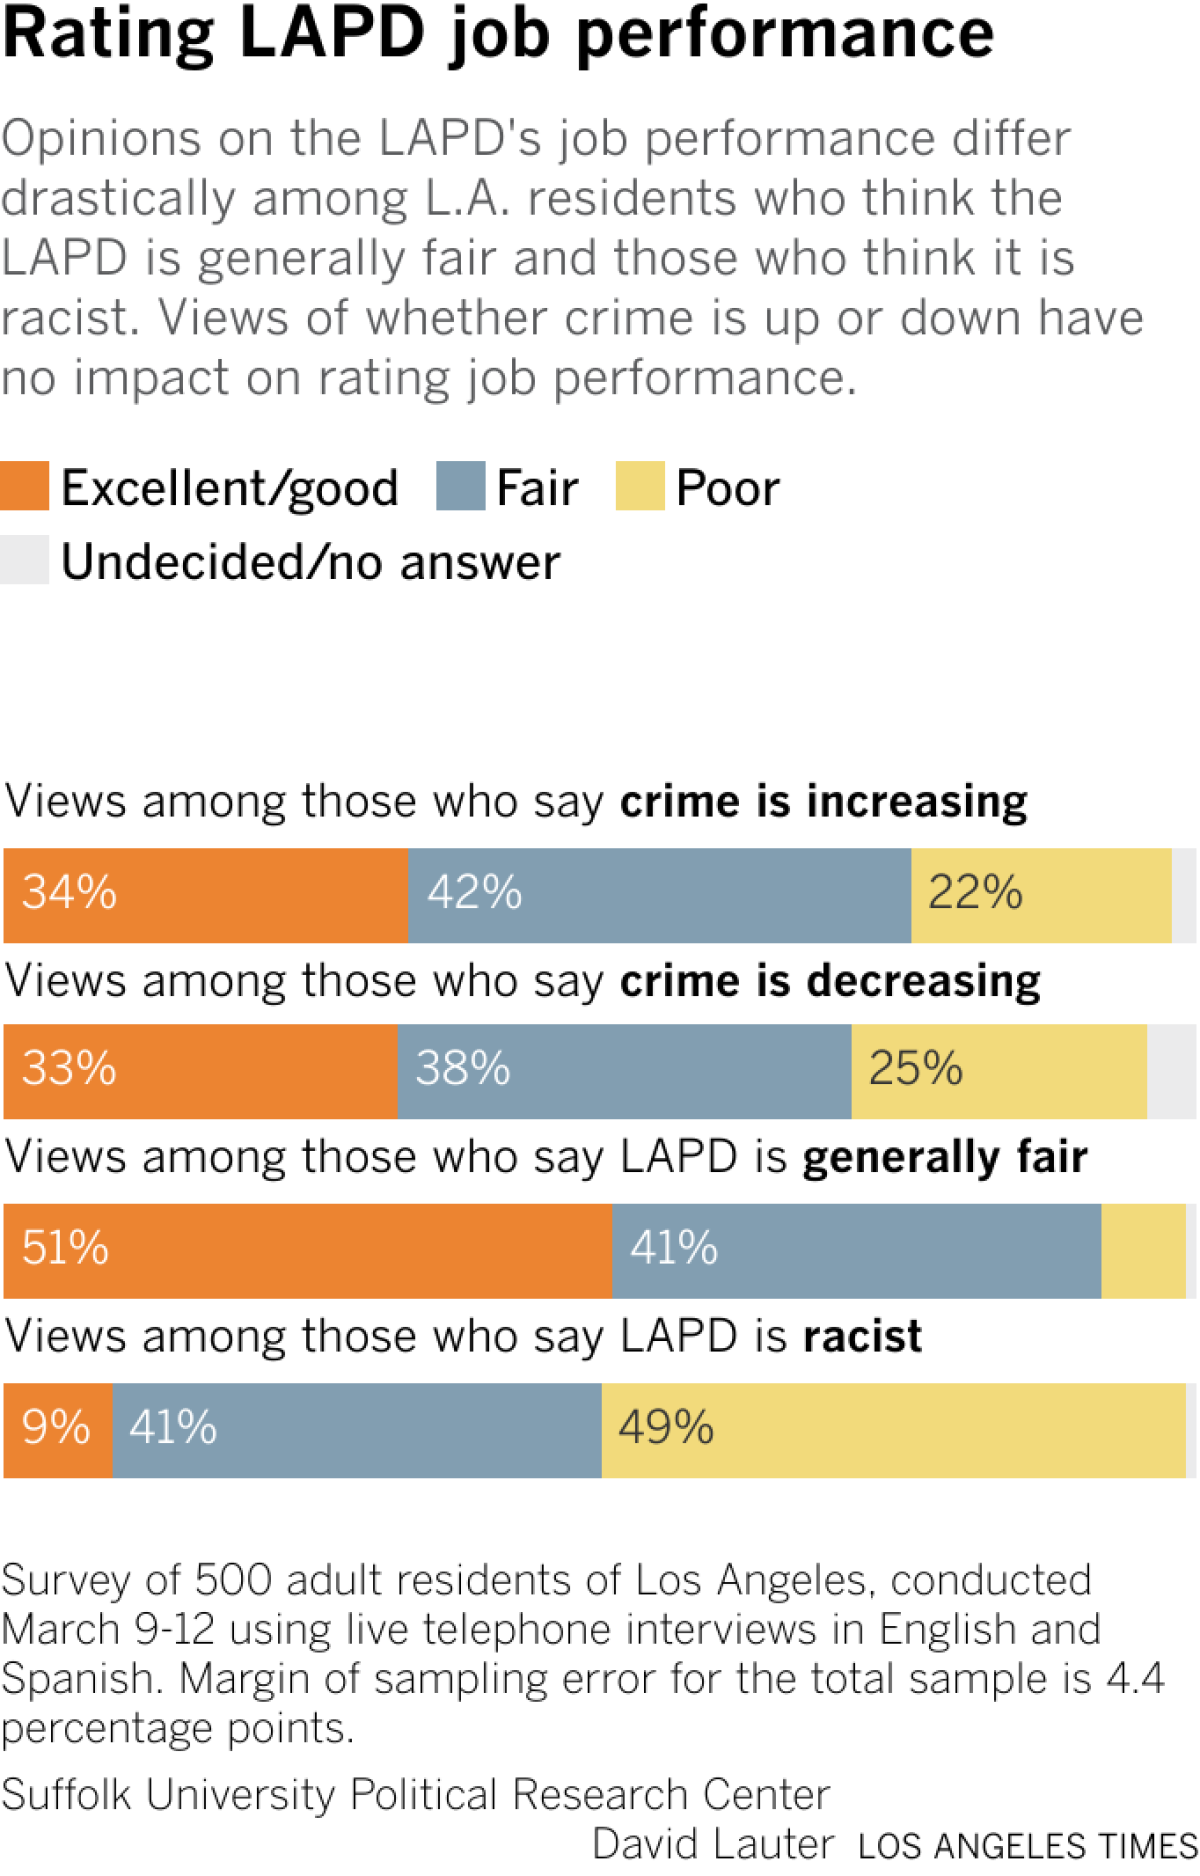 Bars show the share of LA residents who think the LAPD is doing an excellent/good, fair or poor job broken down by whether they believe crime is increasing or decreasing and whether they believe the LAPD is generally fair in its treatment of people of different races or is racist.